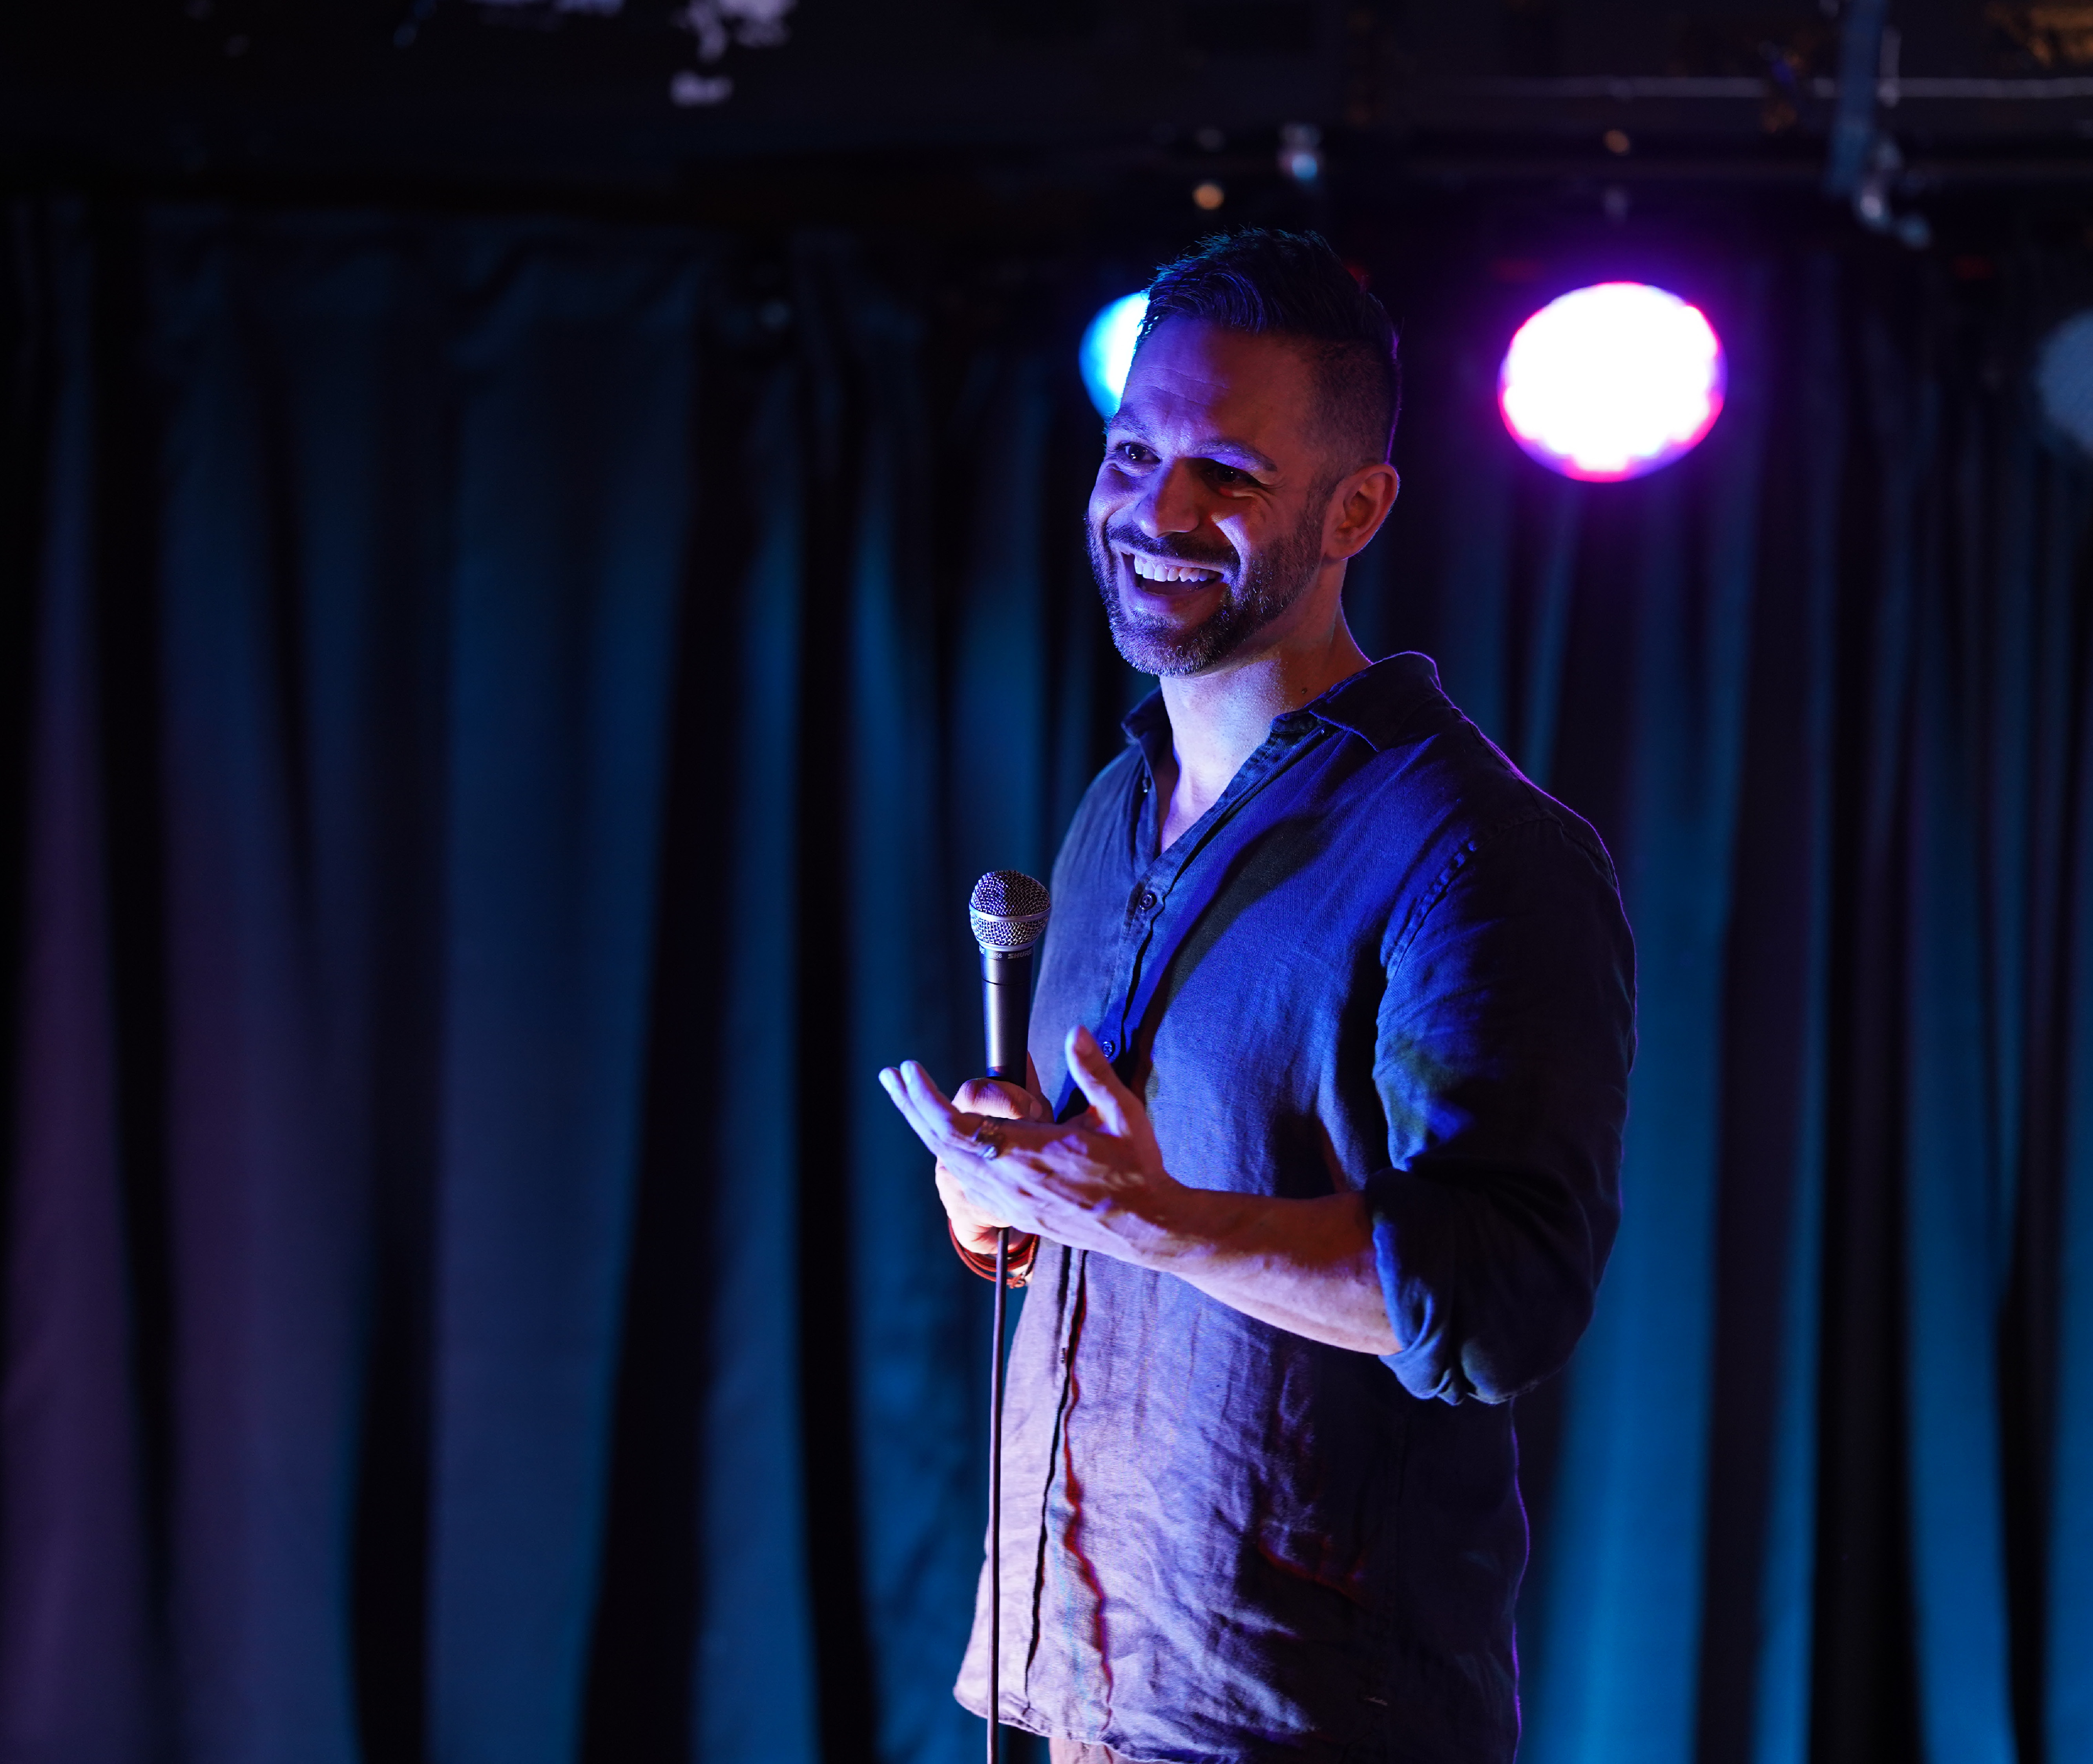 Join David Crisante, from the Sydney Comedy School, for this interactive workshop on how to unleash your inner comedian and develop your own improv comedy.